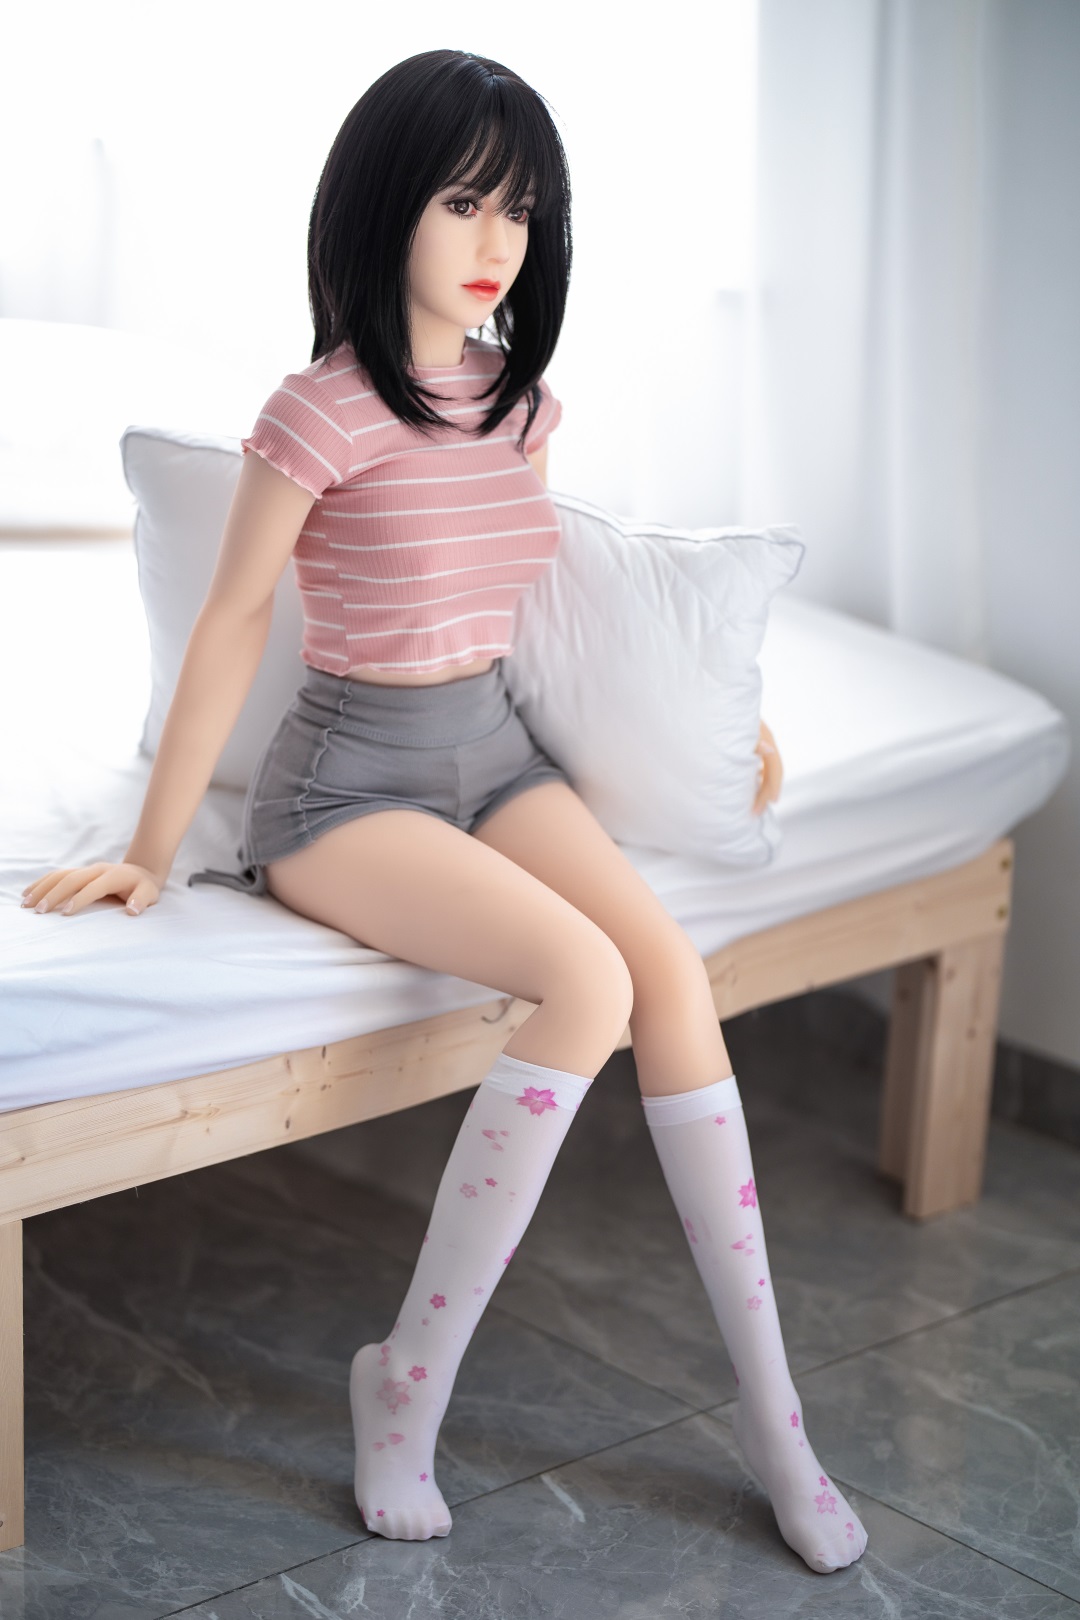 Libert - 4ft 11 / 150cm Asian Style Small Breast Realistic Sex Doll (5 sizes)